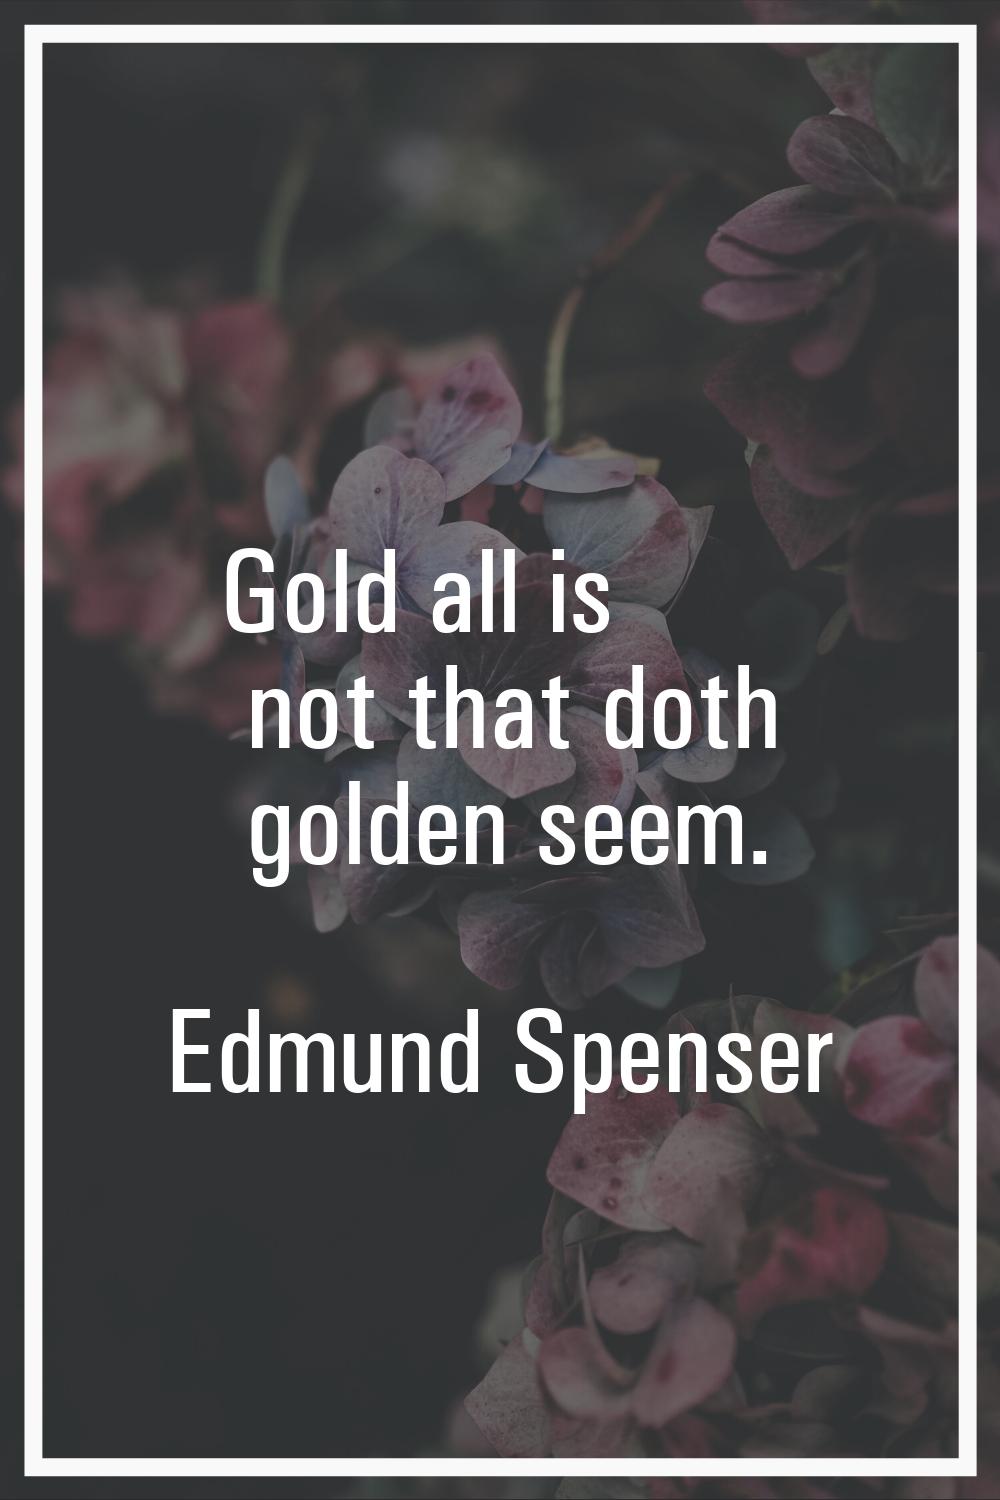 Gold all is not that doth golden seem.